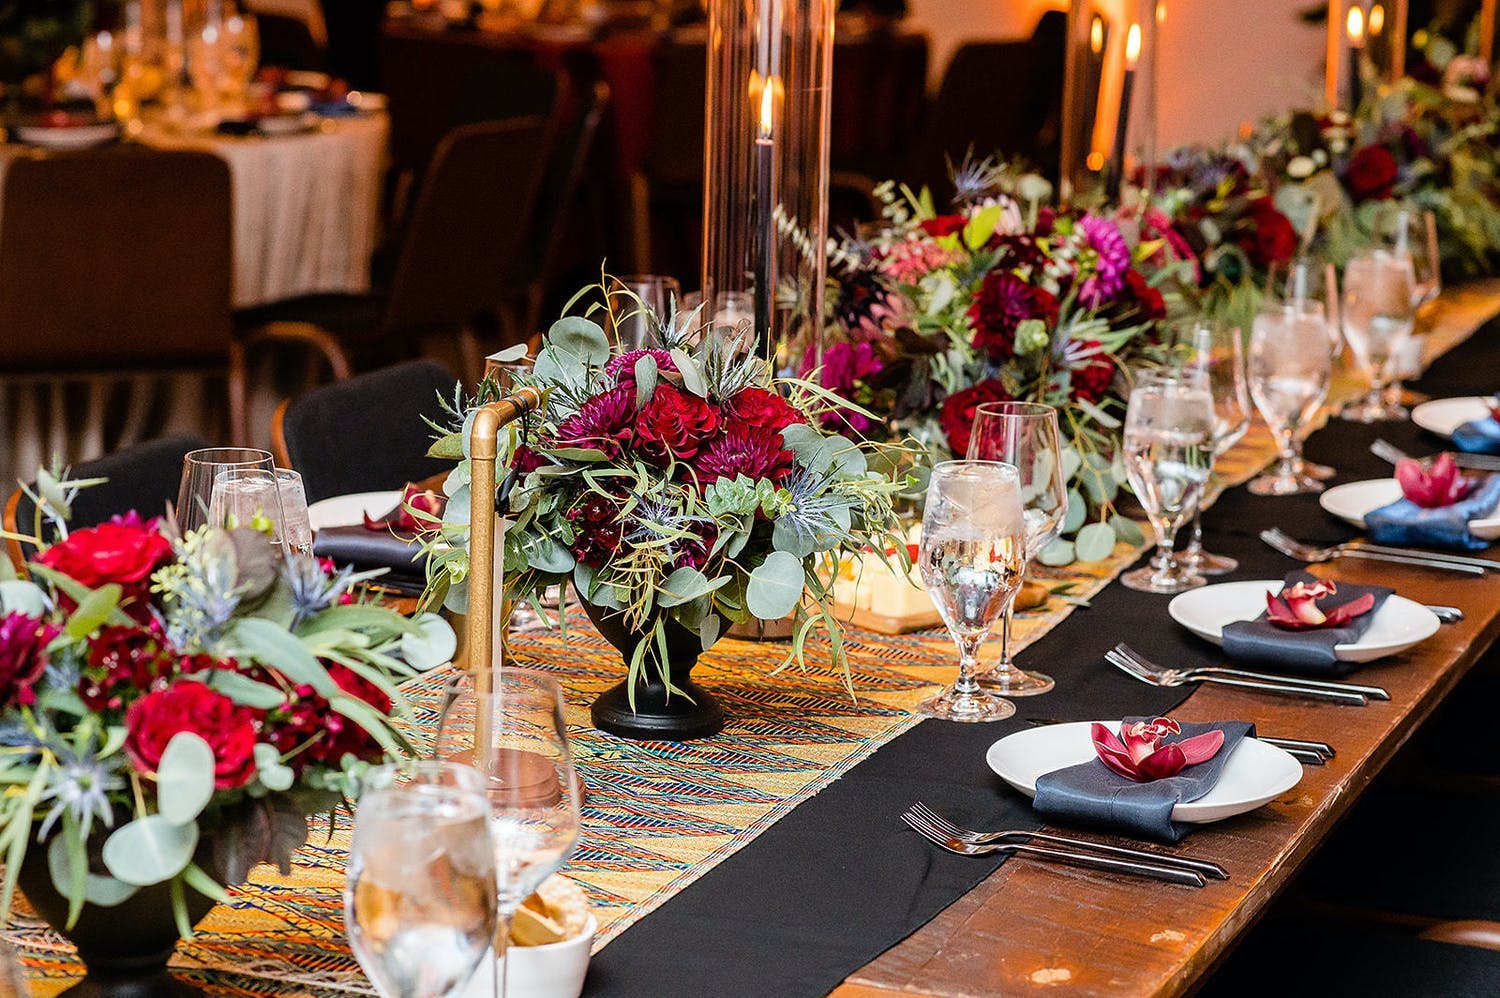 Wedding reception table with crimson and greenery centerpieces in jet-black vases | PartySlate